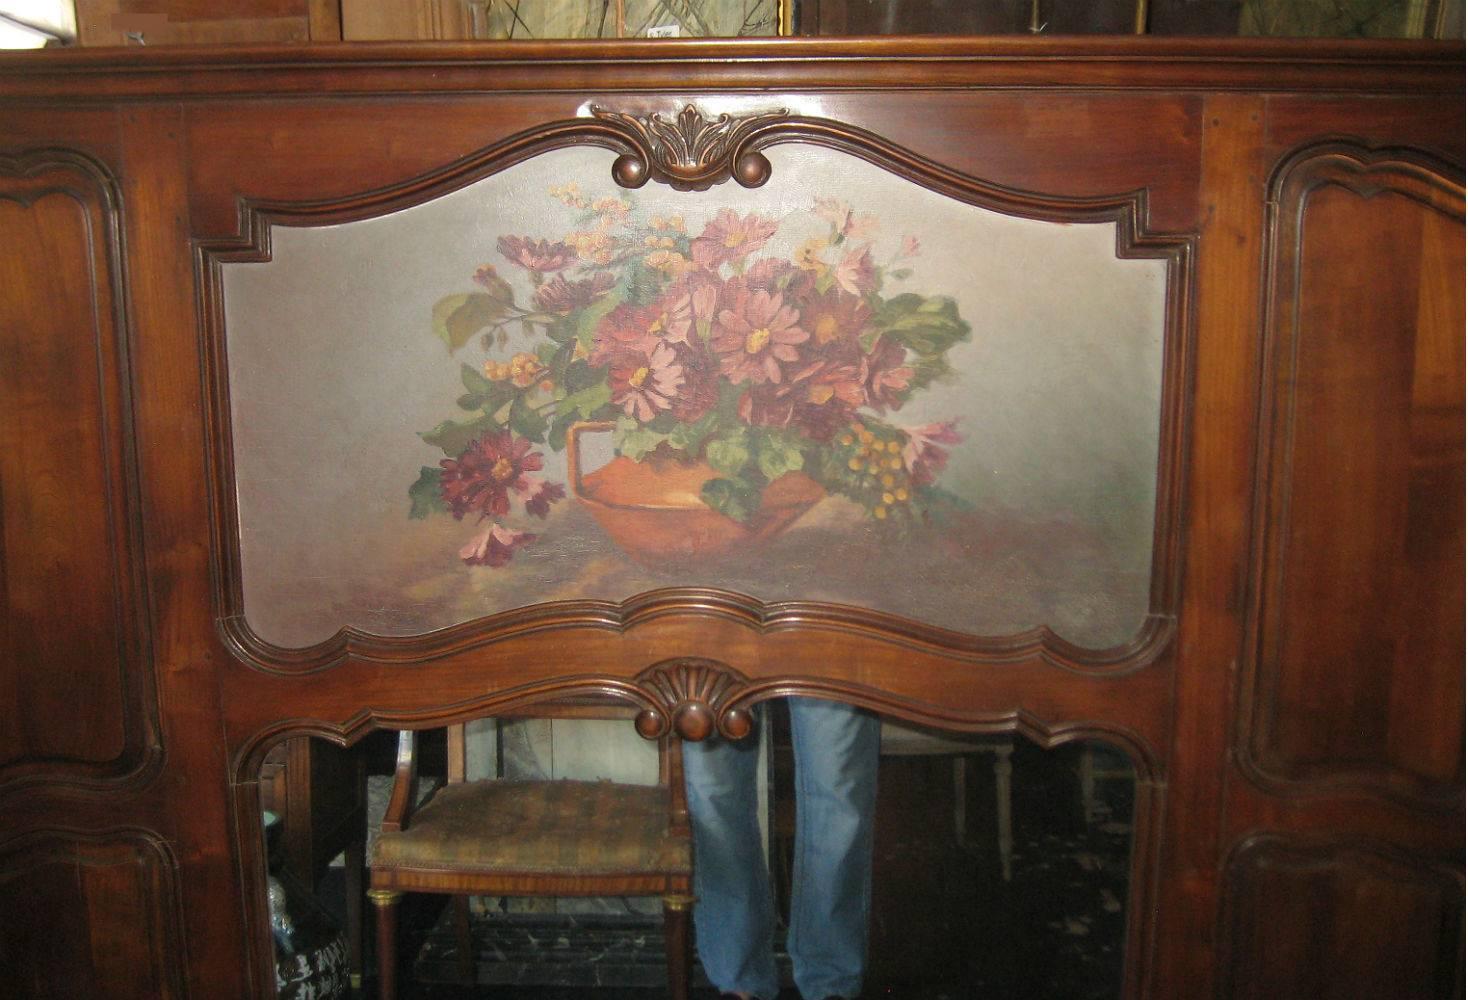 Beautiful Provencial Louis XV carved fruitwood trumeau; the molded cornice above a painting of flowers over a mirror, flanked by carved and molded panels, peg (dowel) construction, the reverse with a Parisian plaque Andre Jules, Versailles.